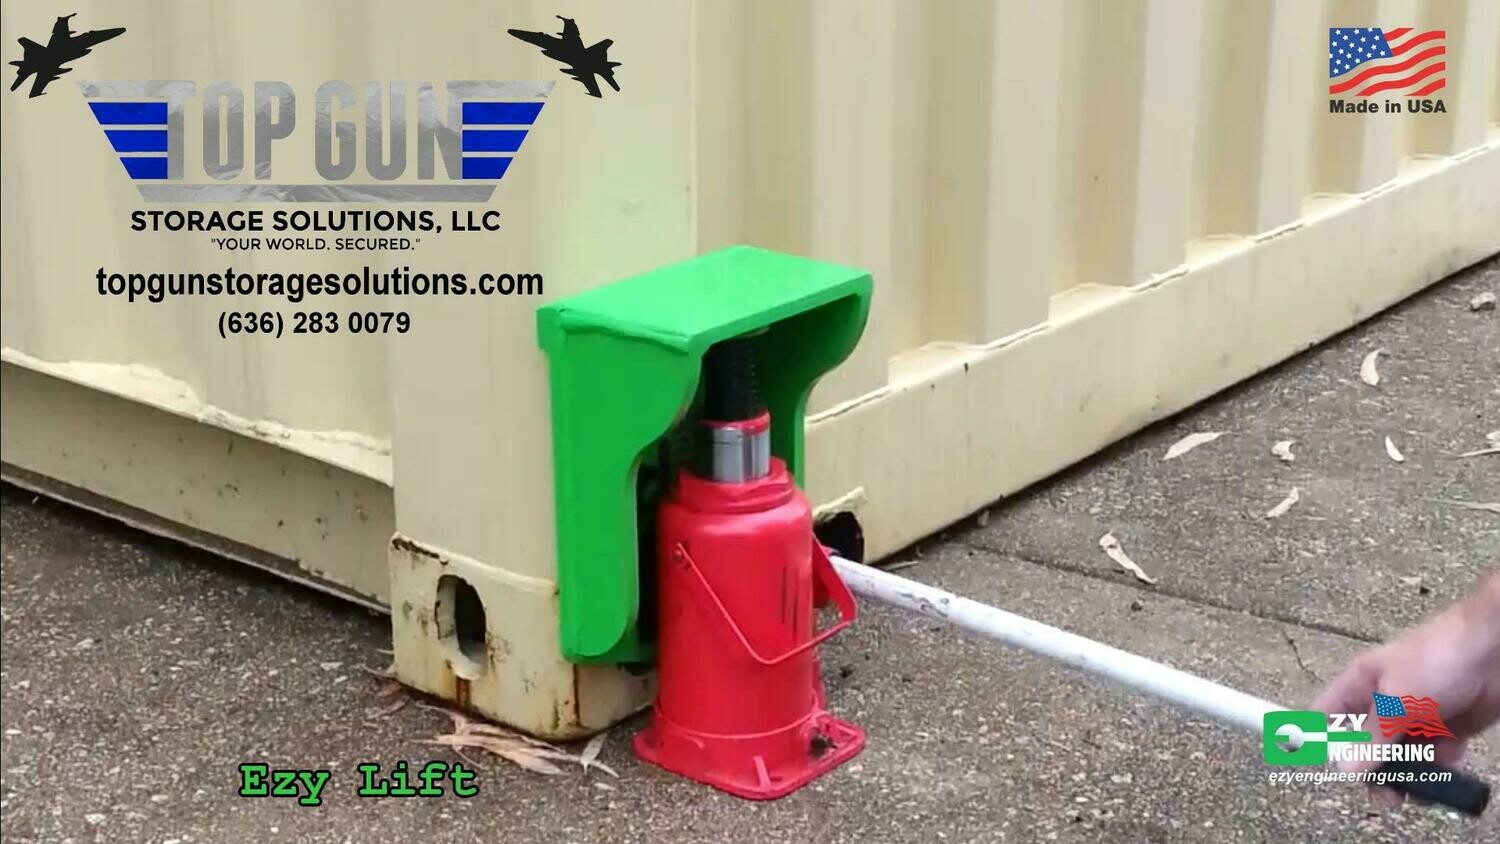 Shipping Container Lifter. Original Ezy Lift. Made in the USA. Free shipping continental US